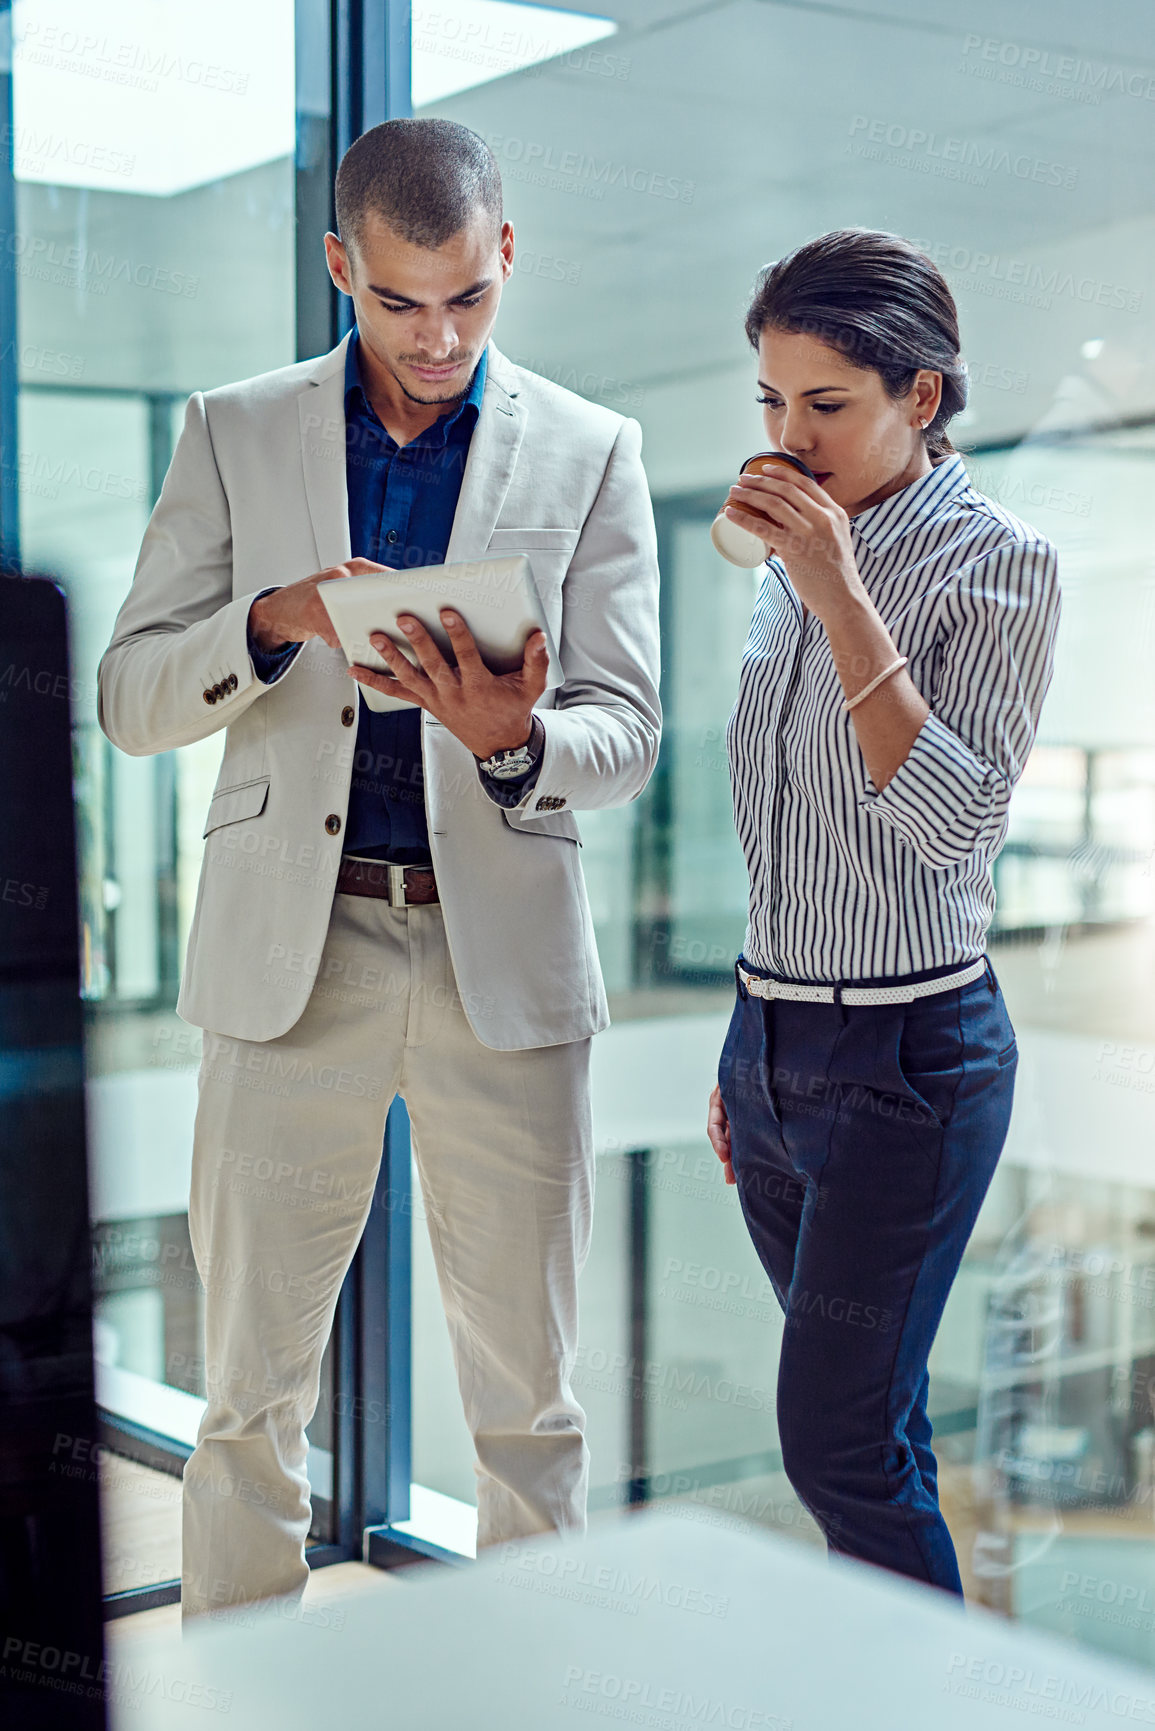 Buy stock photo Cropped shot of two businesspeople working together on a digital tablet in an office